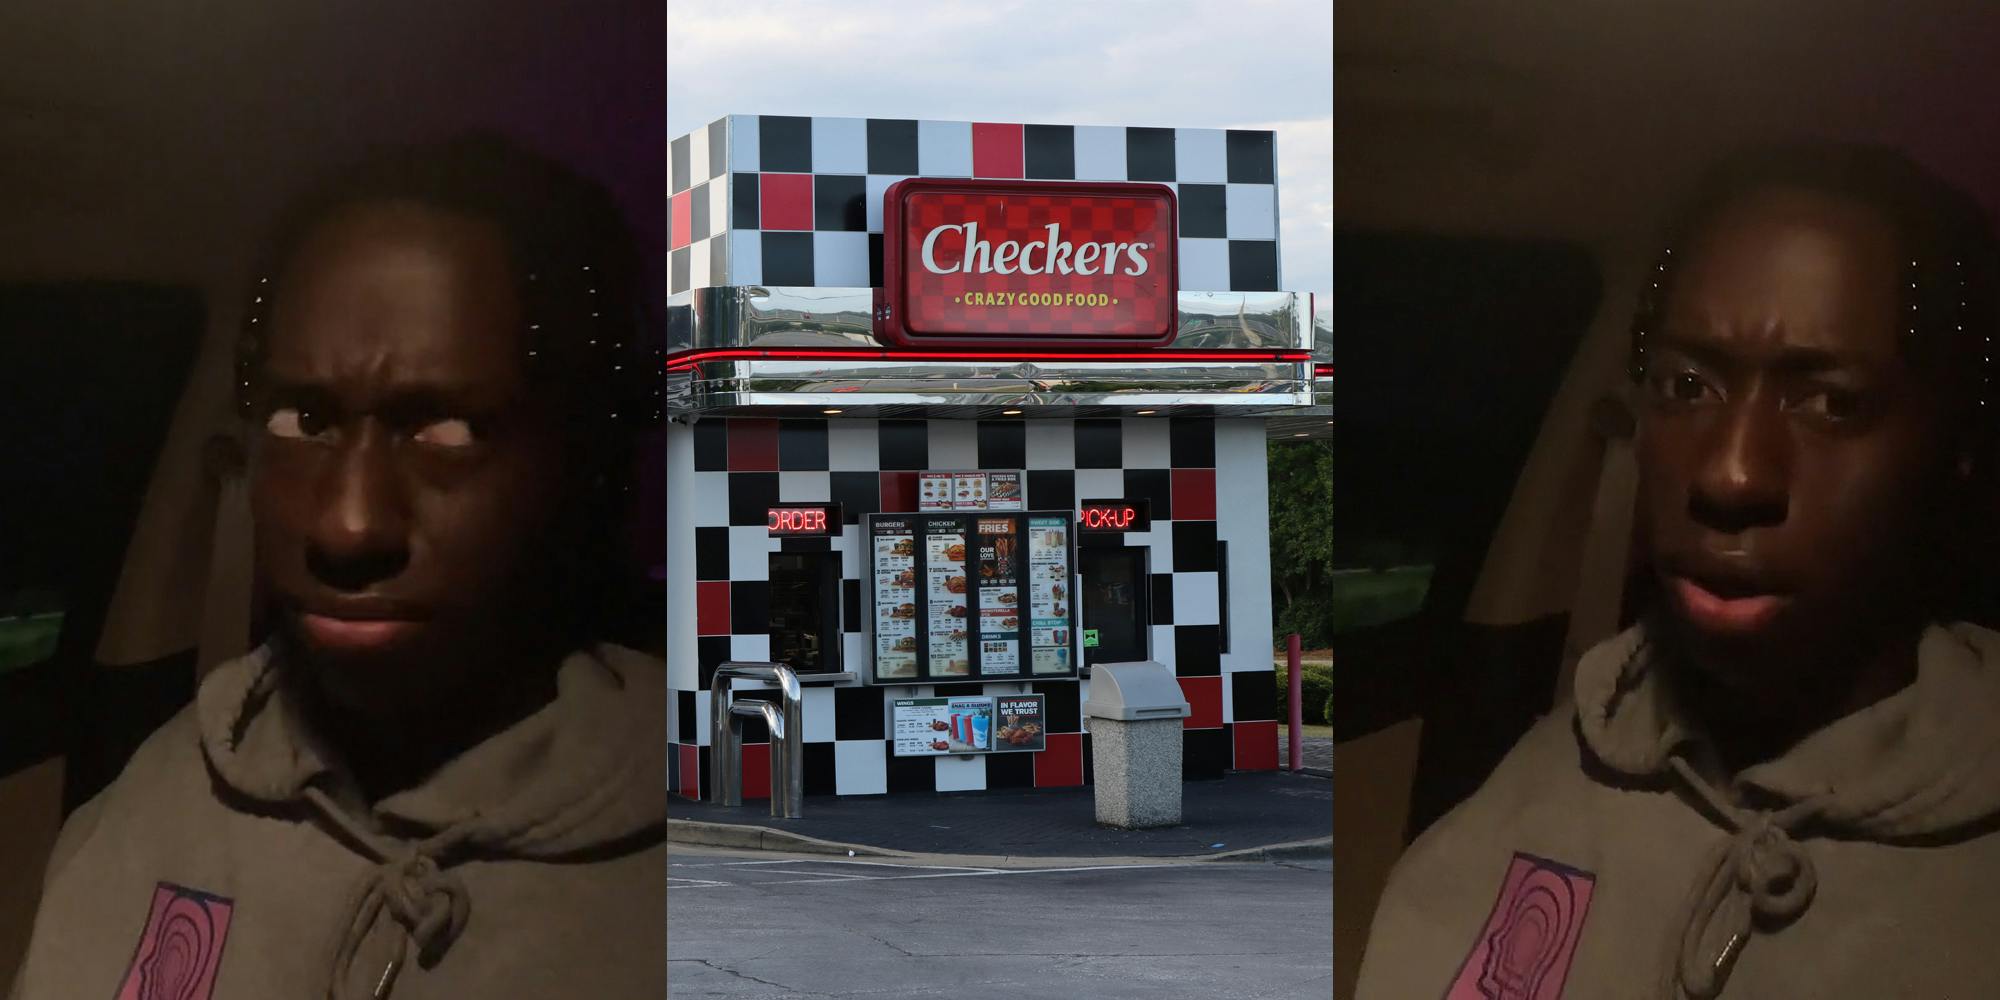 ‘You doing all this, and it’s not even that serious’: DoorDash driver says Checkers worker called him a homophobic slur after he was given the wrong order